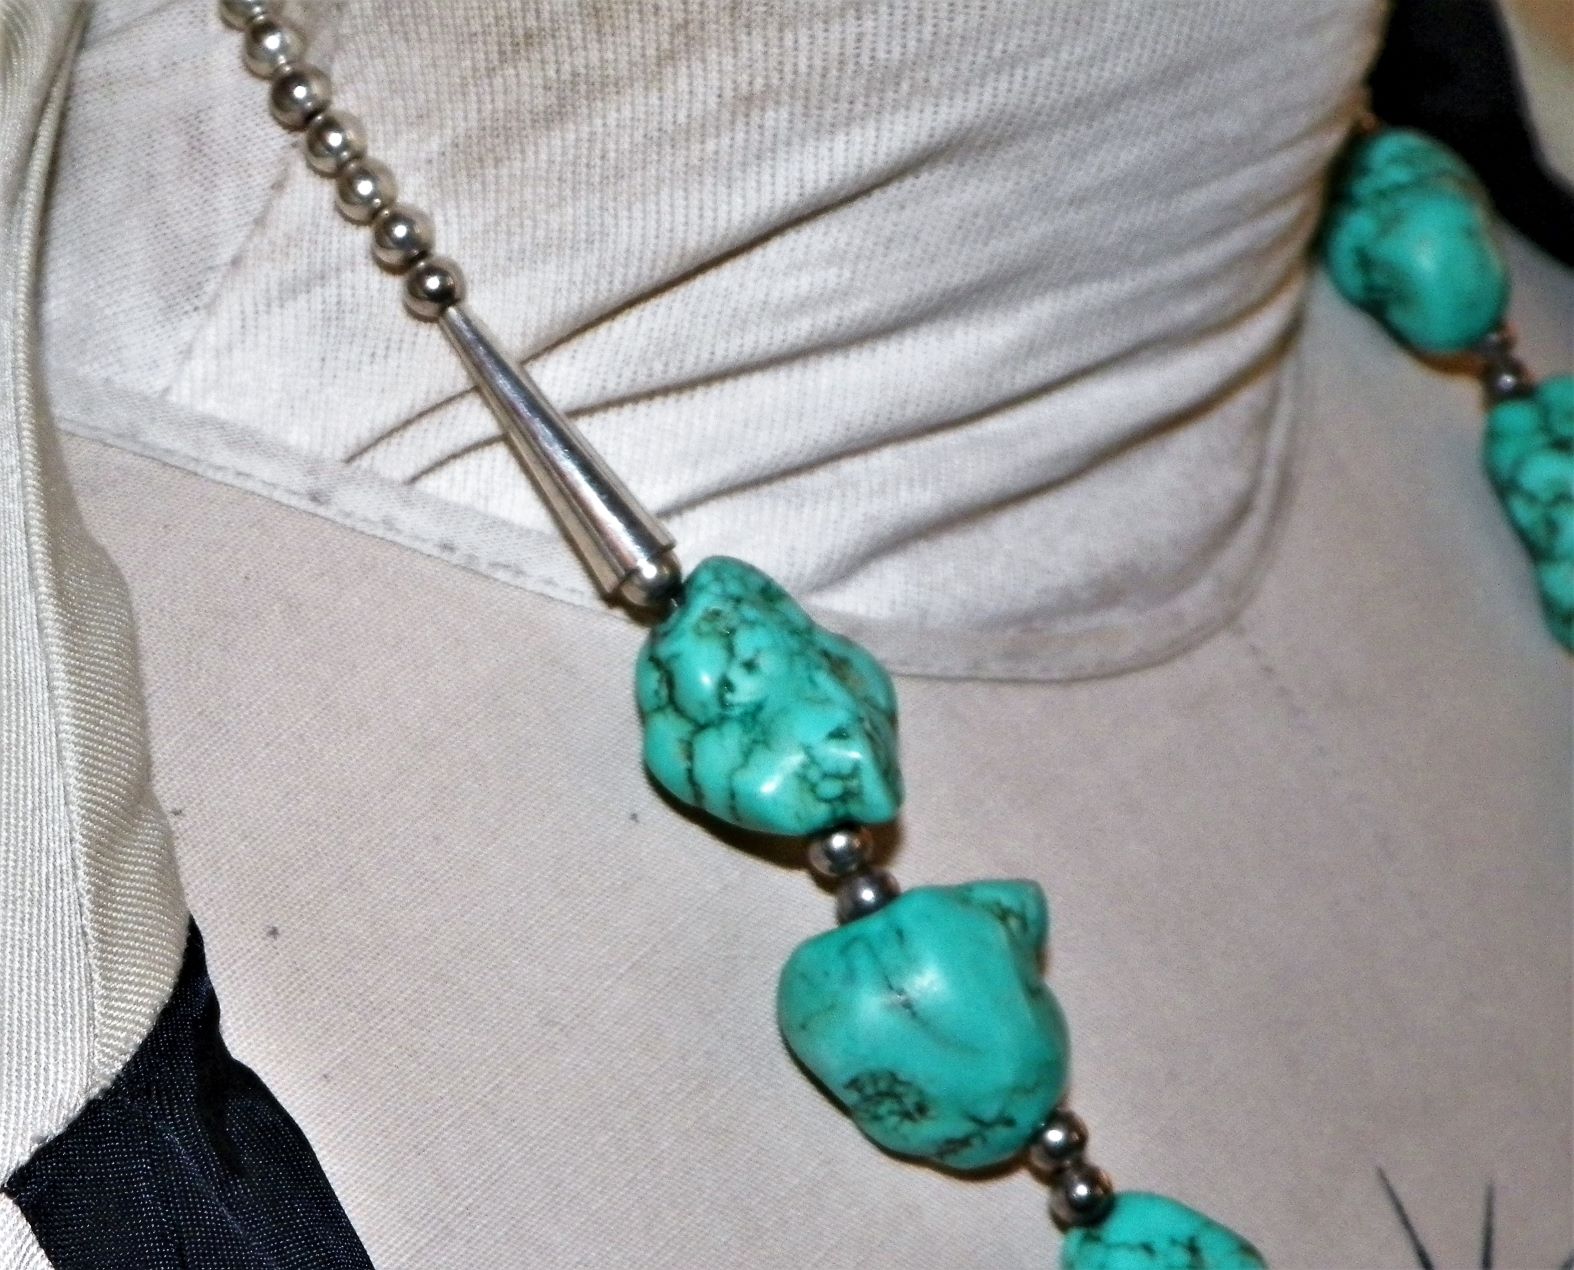 JEWELRY NECKLACE TURQUOISE CHUNKY 3AA.JPG